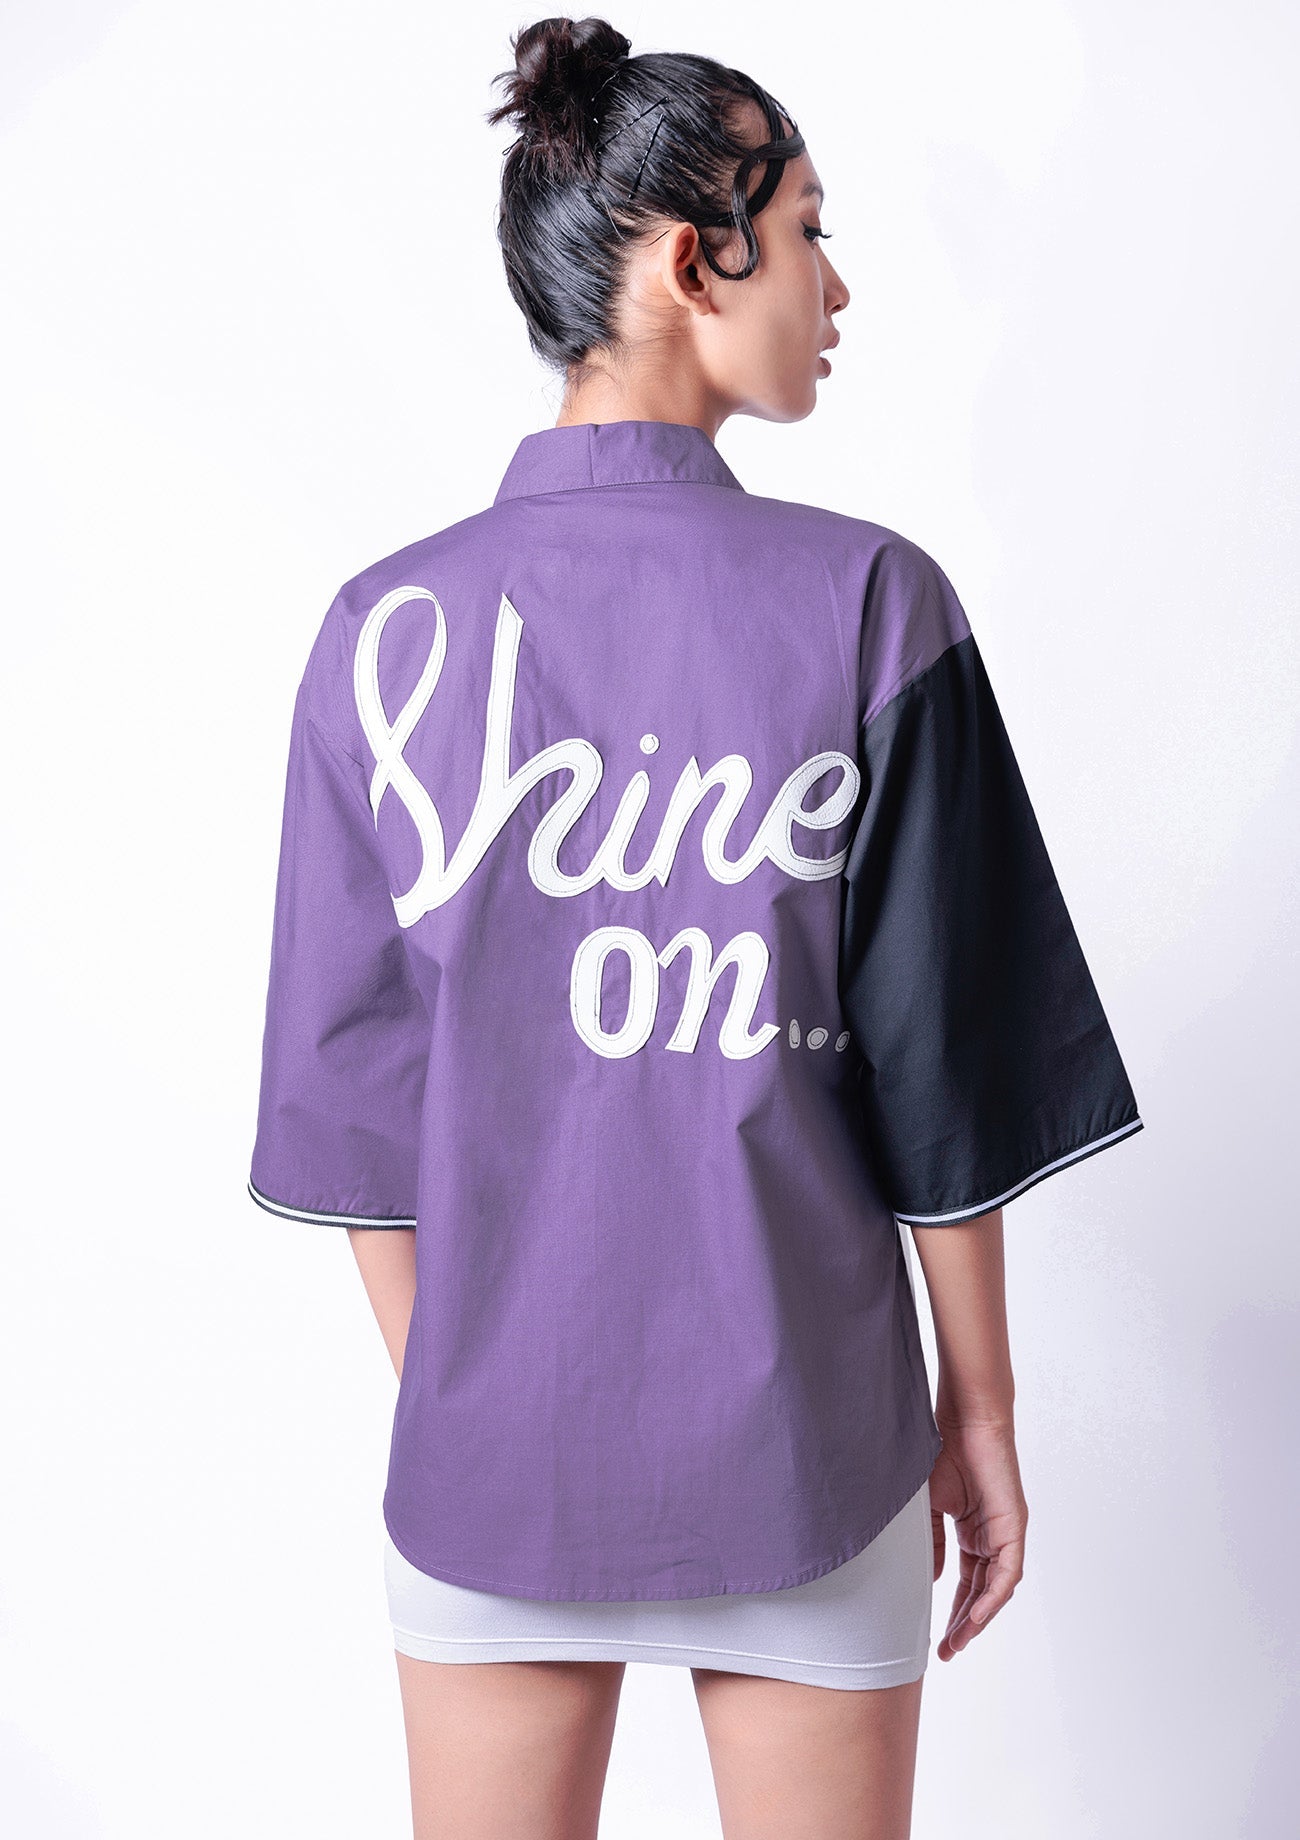 Black/White/Lilac Cotton Shirt With Embroidered Pocket And Slogan Applique On Lilac Back